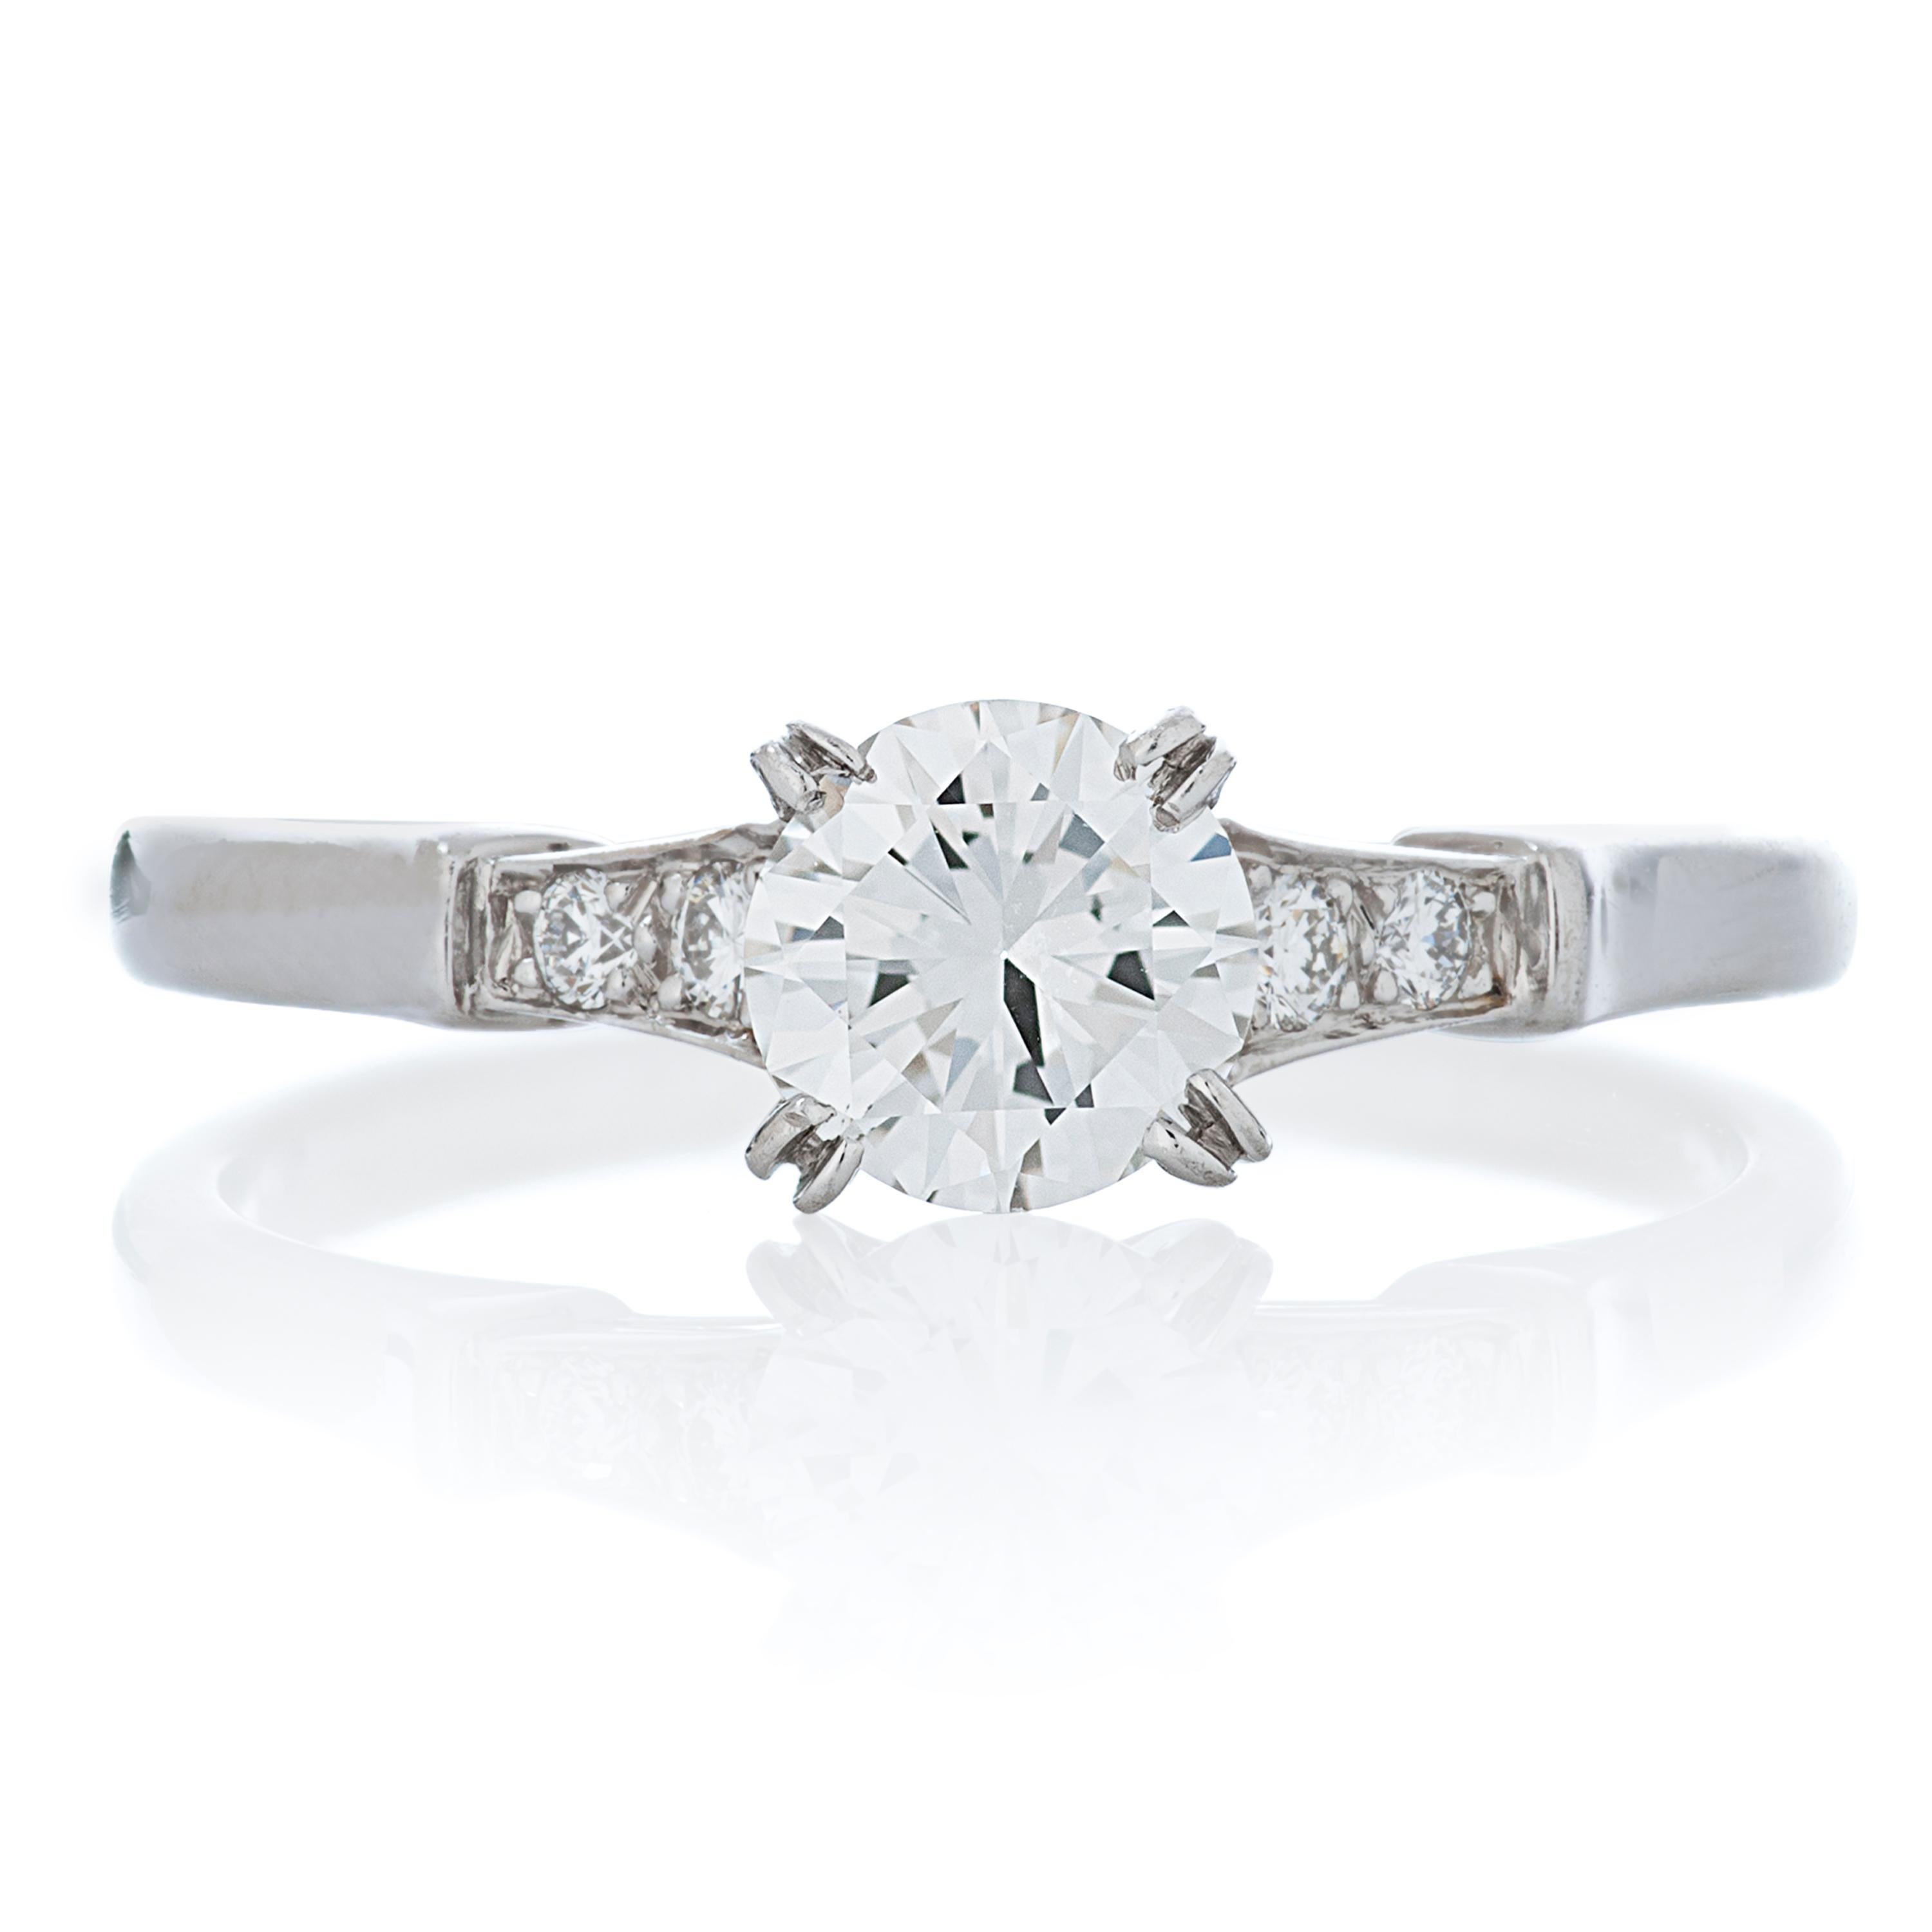 J.E. Caldwell & Co. round diamond engagement ring in platinum.  

This ring features a GIA certified 0.57 carat round brilliant cut diamond with E color and VVS2 clarity in a platinum claw-prong setting accented by 4 additional round brilliant cut